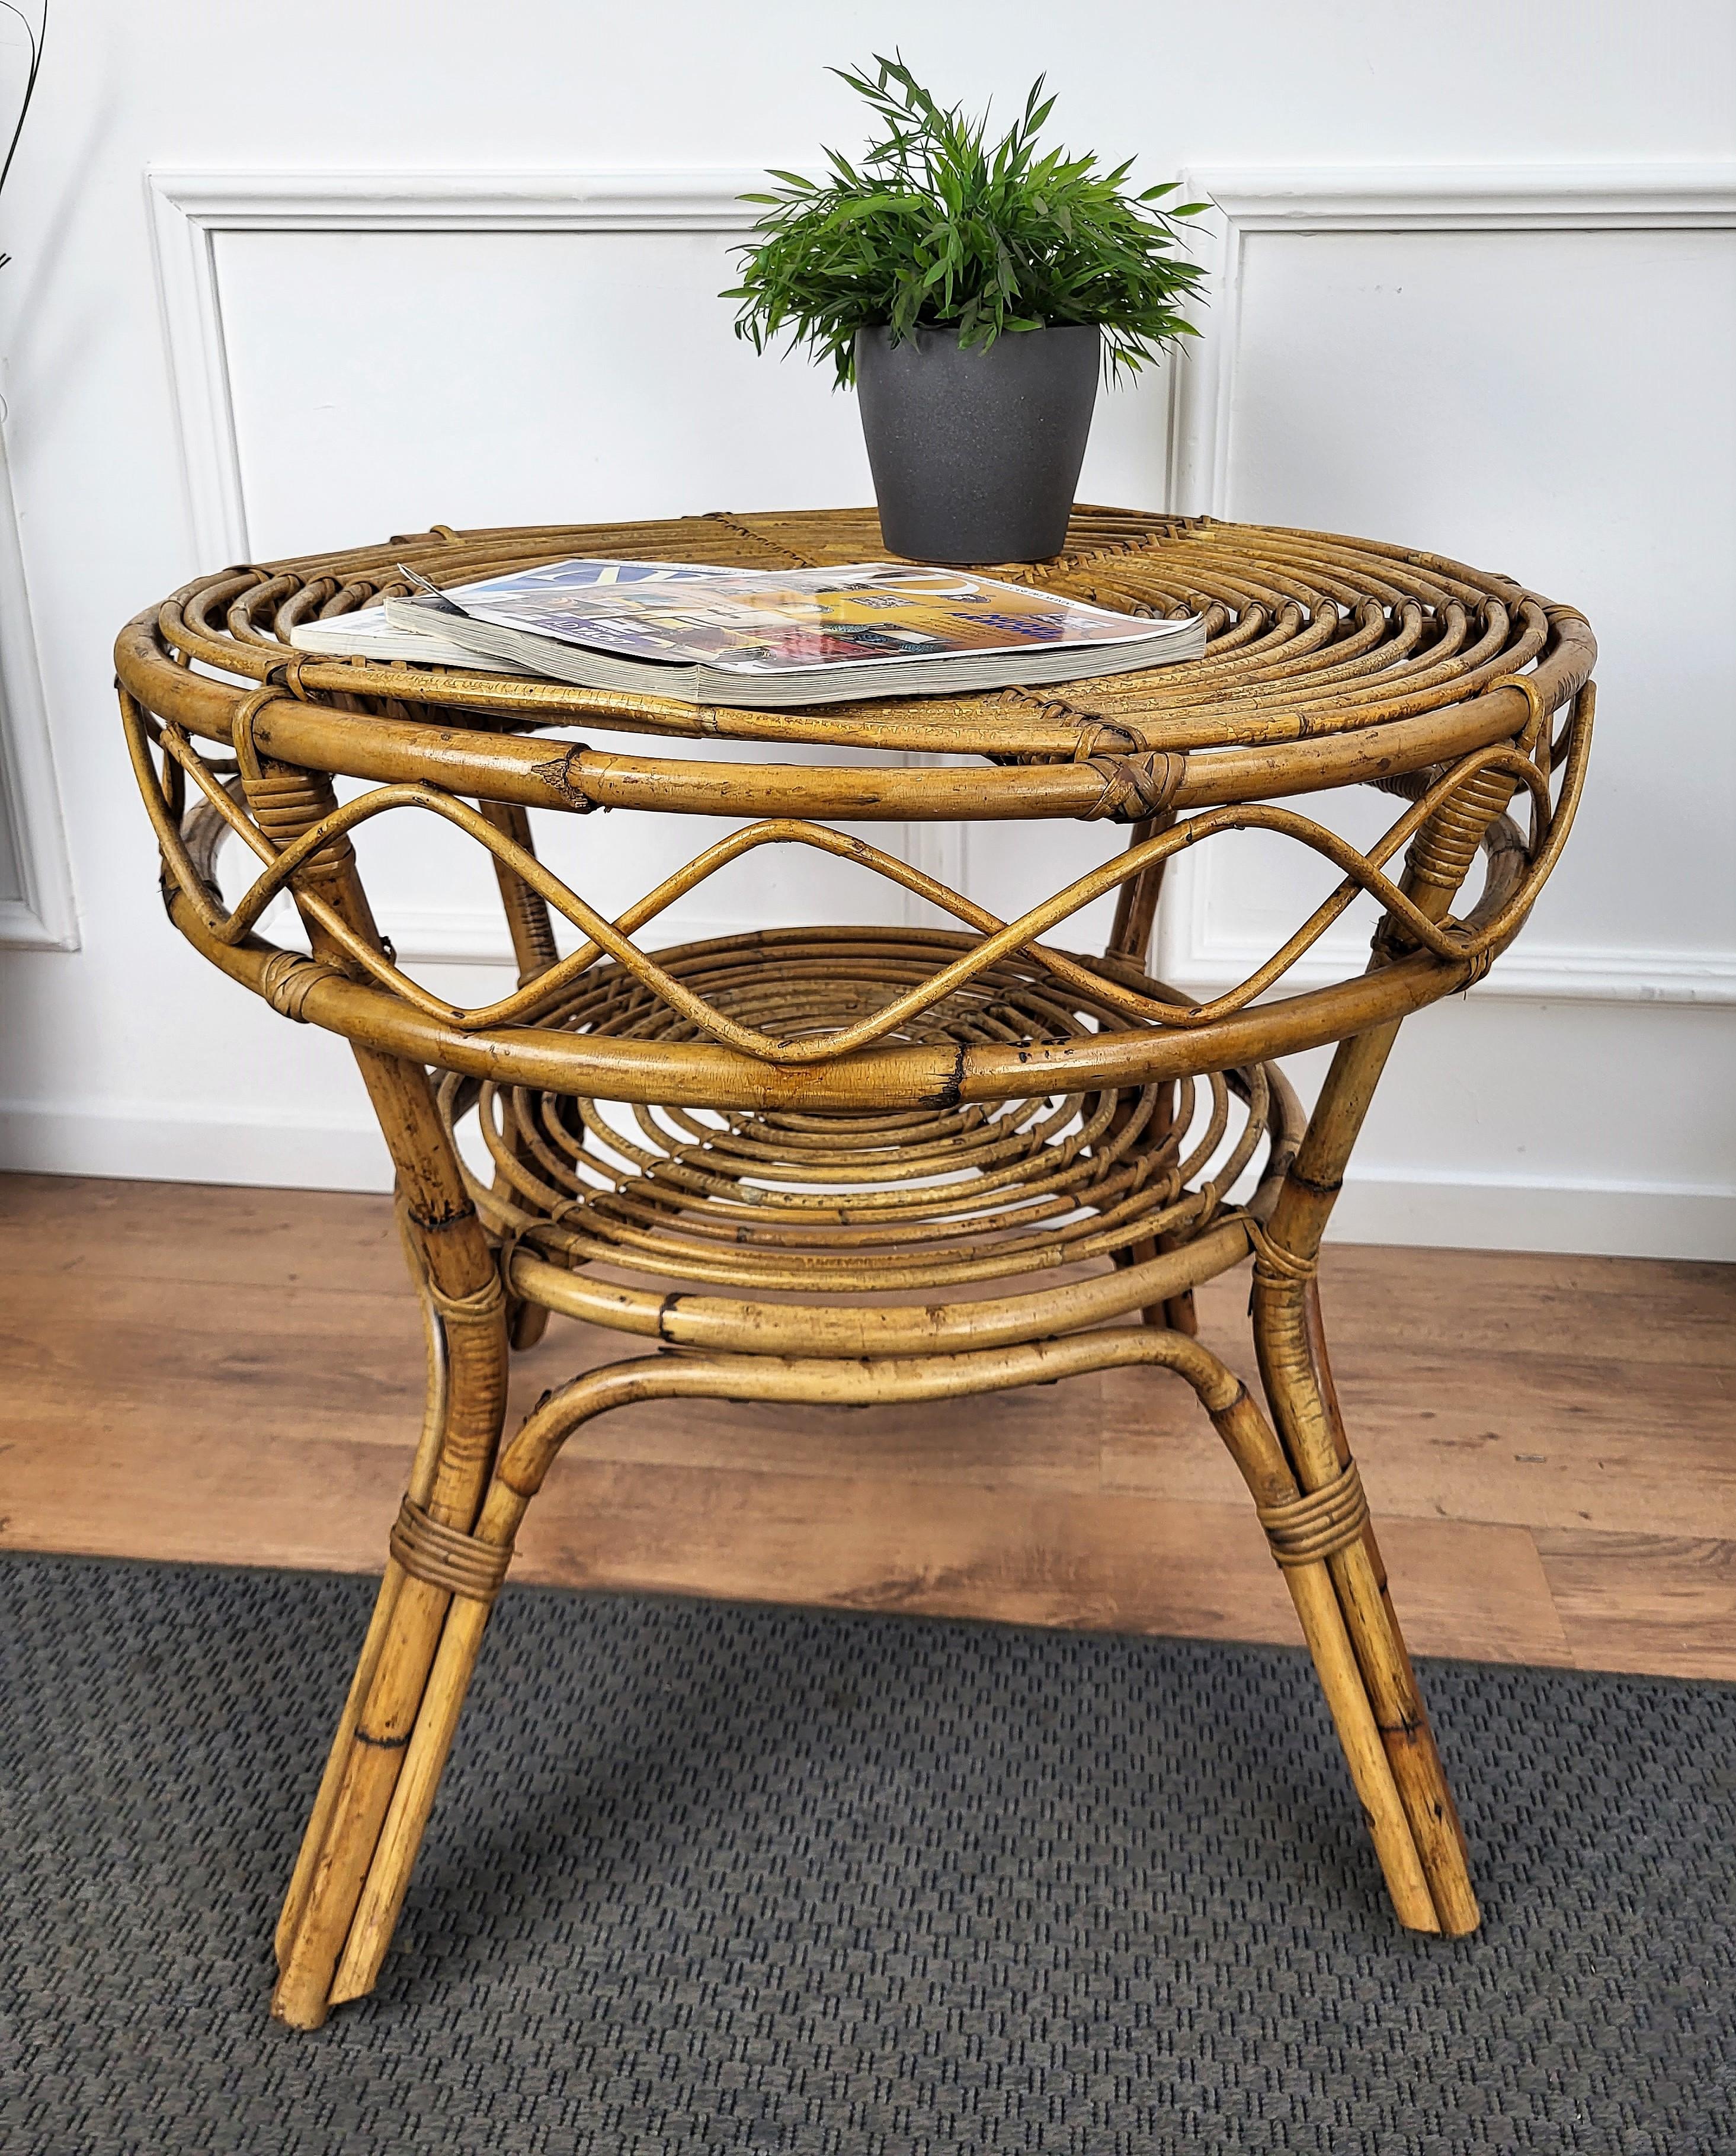 Beautiful 1960s Italian Mid-Century Modern round accent or coffee table, perfect in any room as well as in front or next to a sofa. This charming piece is in the typical style of Dirk van Sliedrecht and Audoux and Minet where the organic beauty of